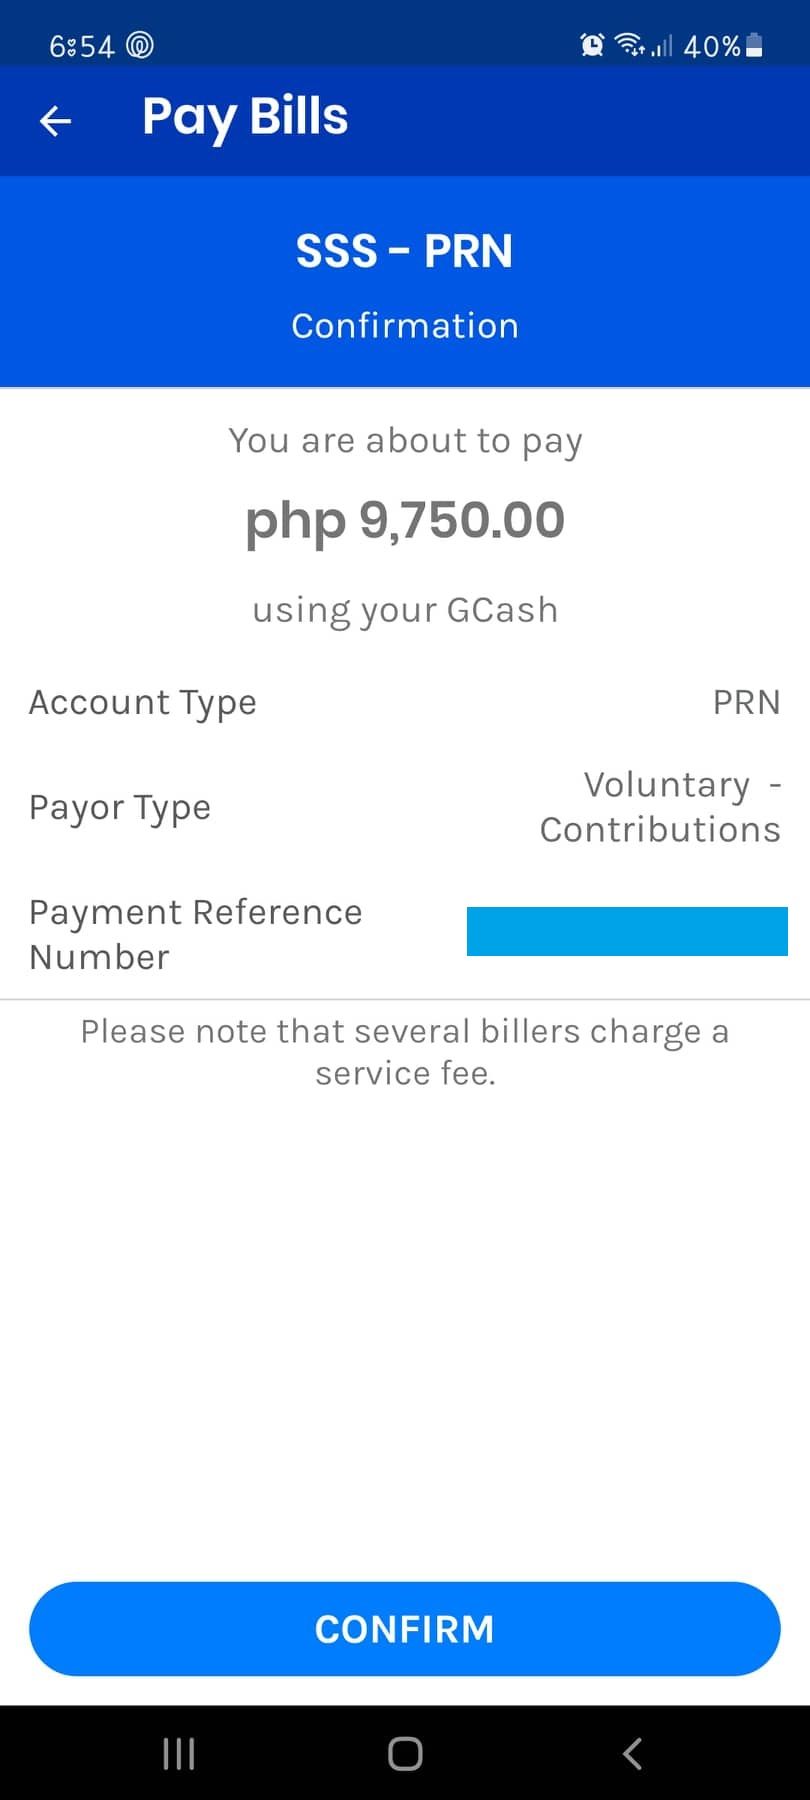 How to Pay SSS Contribution Using PRN and GCASH